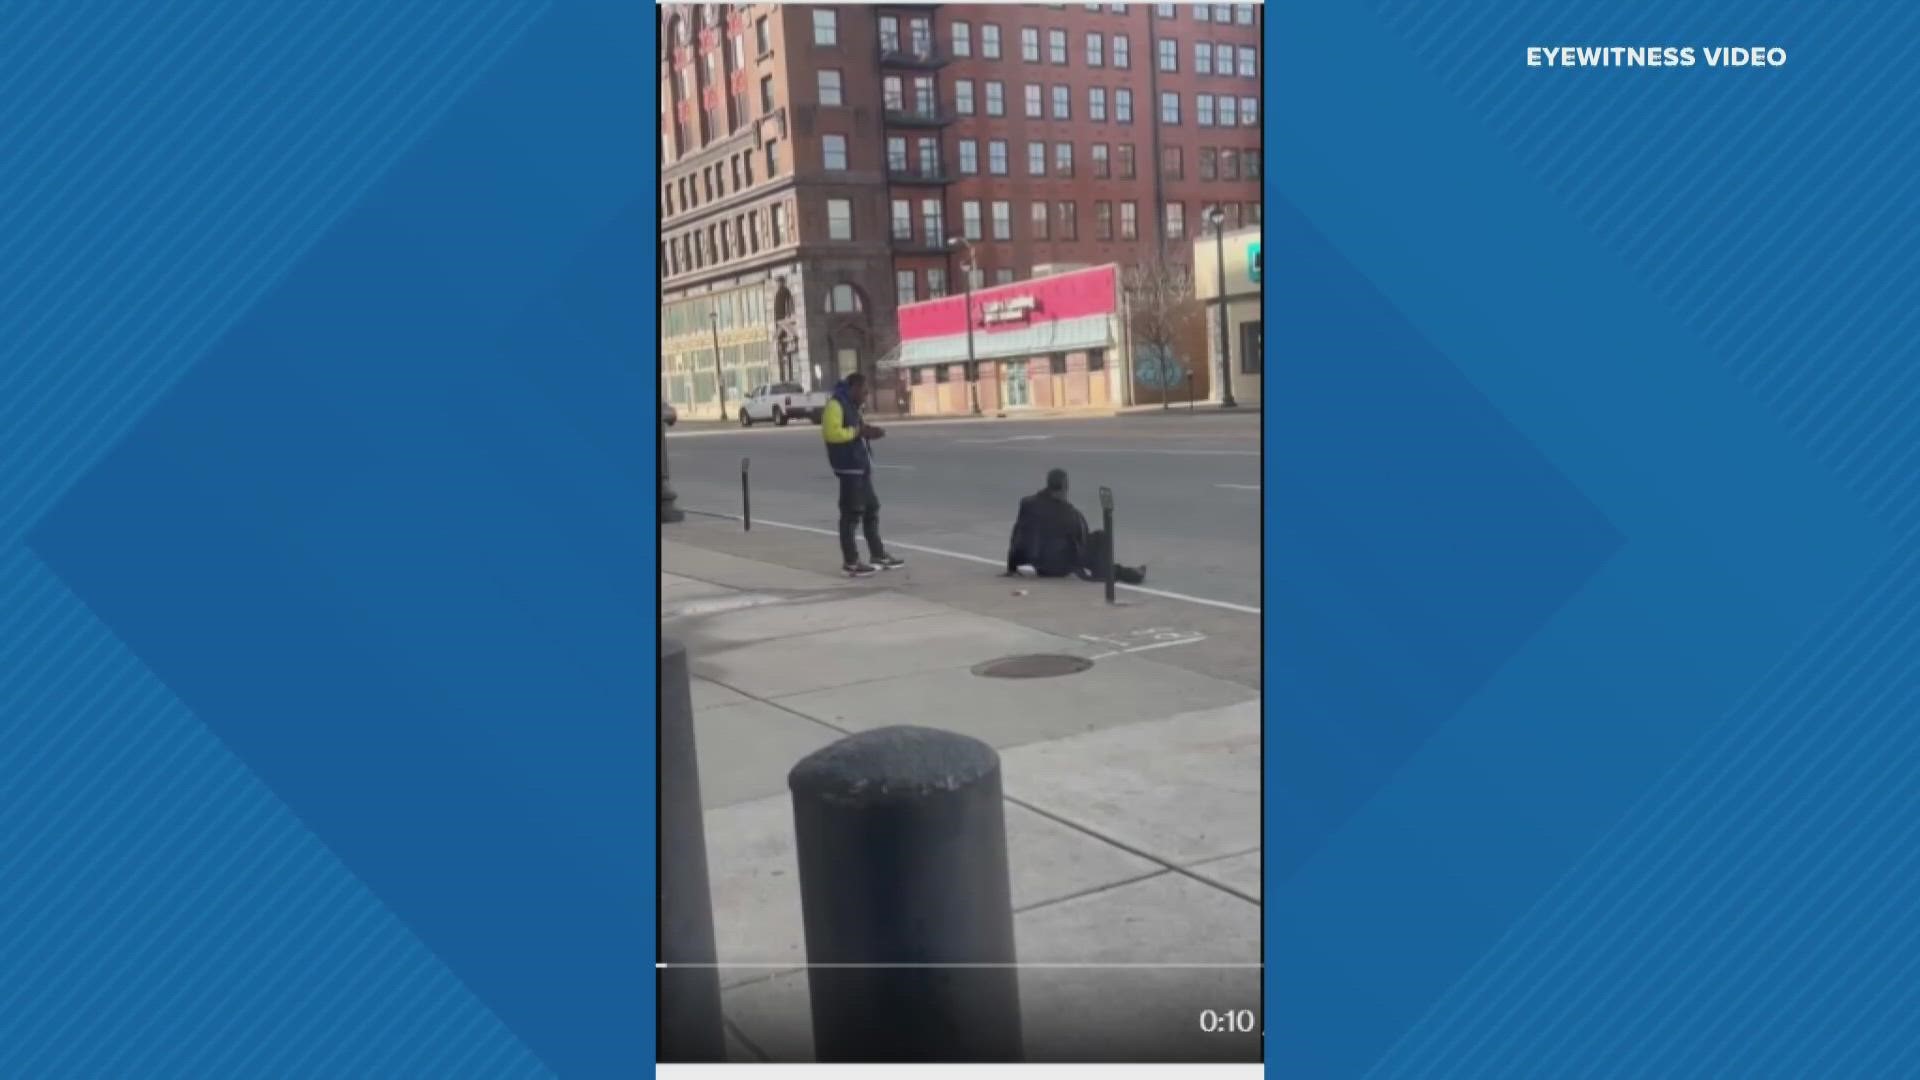 A 23-year-old man was charged with murder Tuesday after police said he was caught on video shooting a man in the head in downtown St. Louis Monday afternoon.